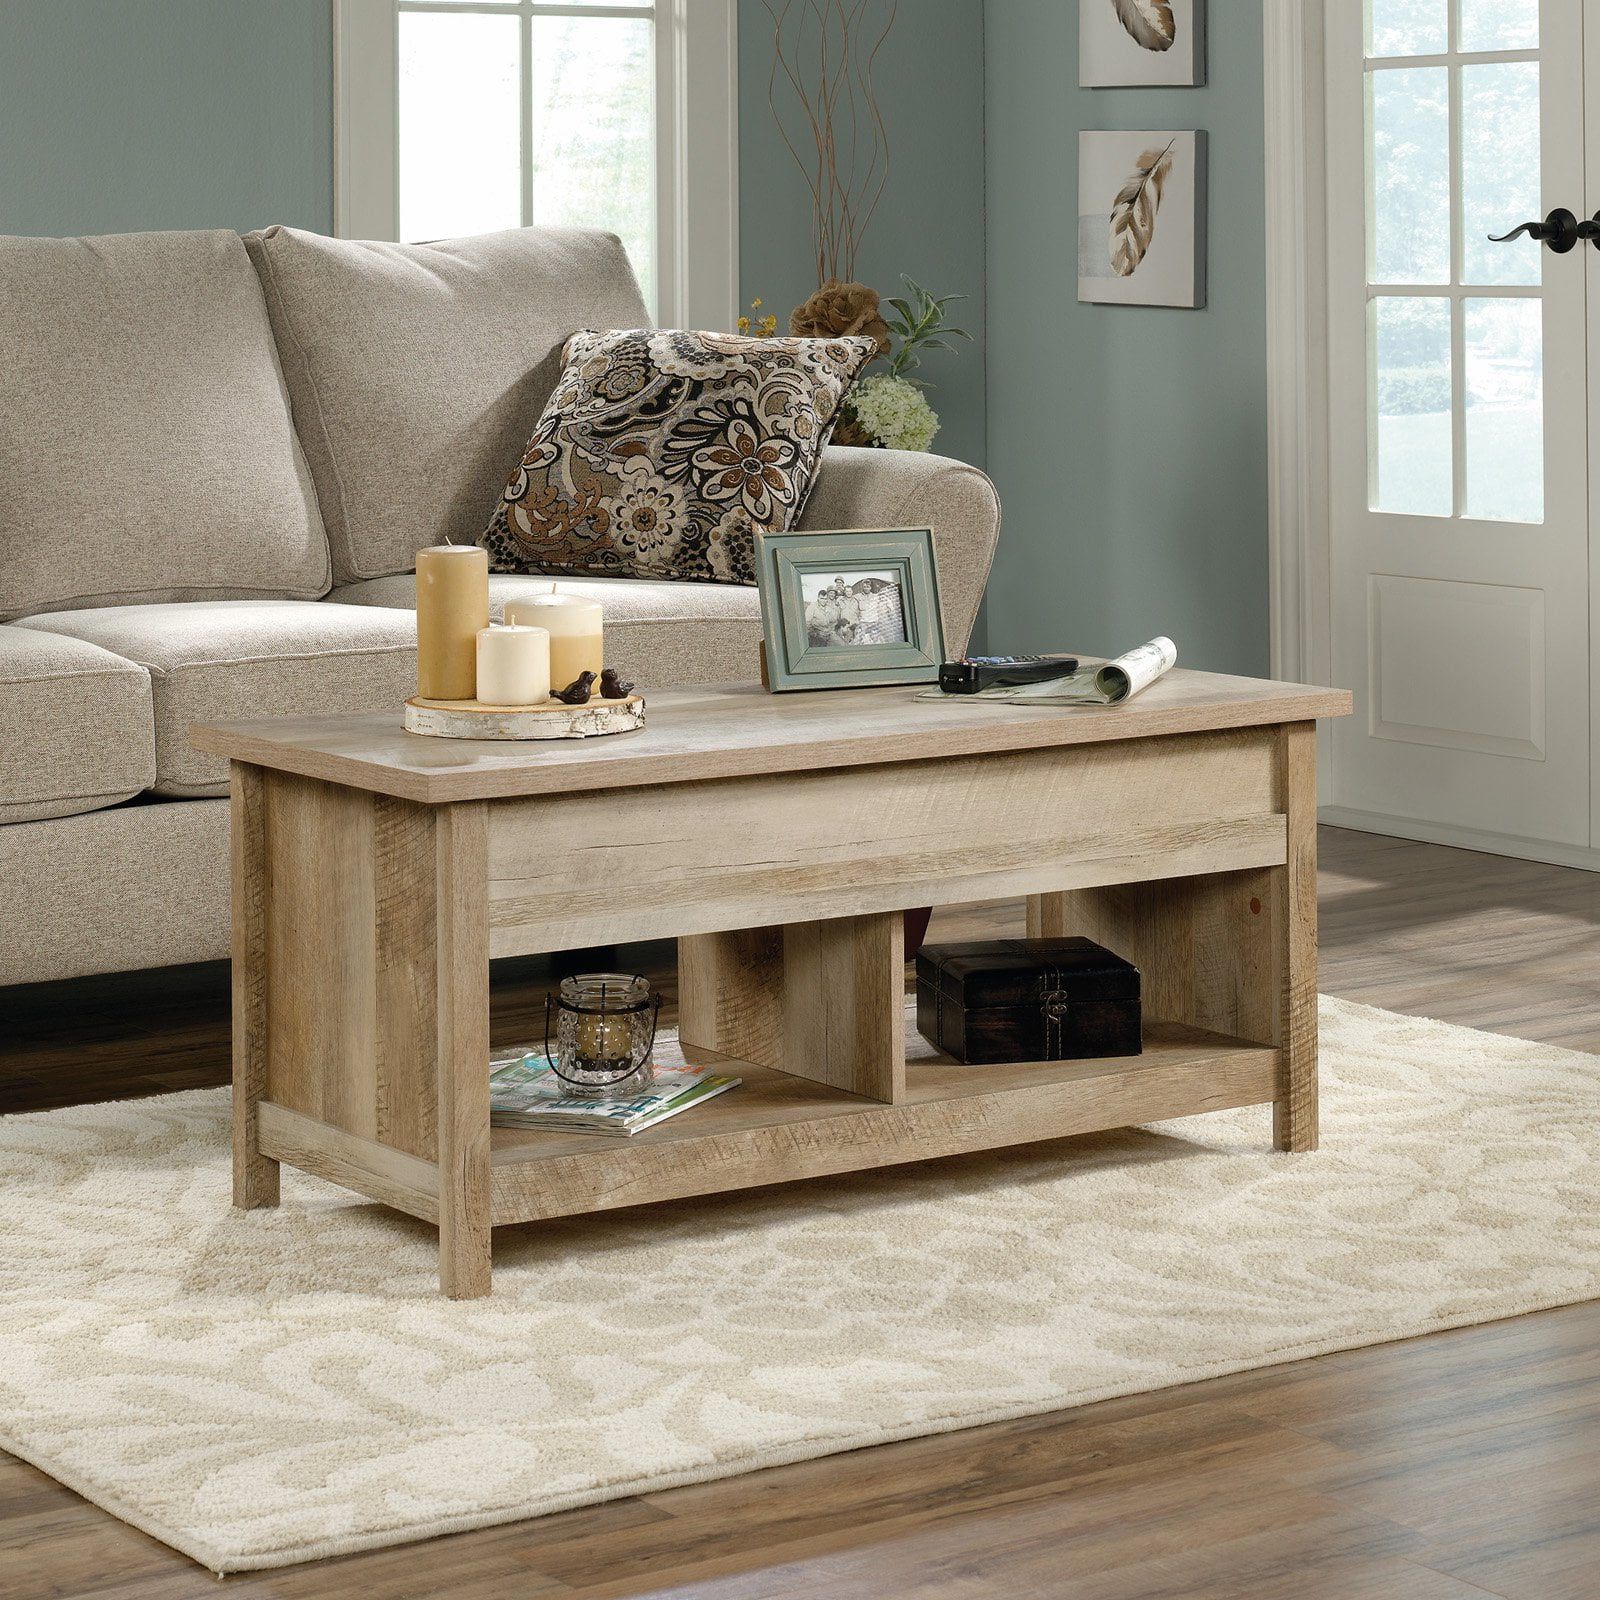 Sauder Modern Farmhouse Lift Top Storage Coffee Table Rustic Oak Finish With Most Recently Released Farmhouse Lift Top Tables (View 13 of 15)